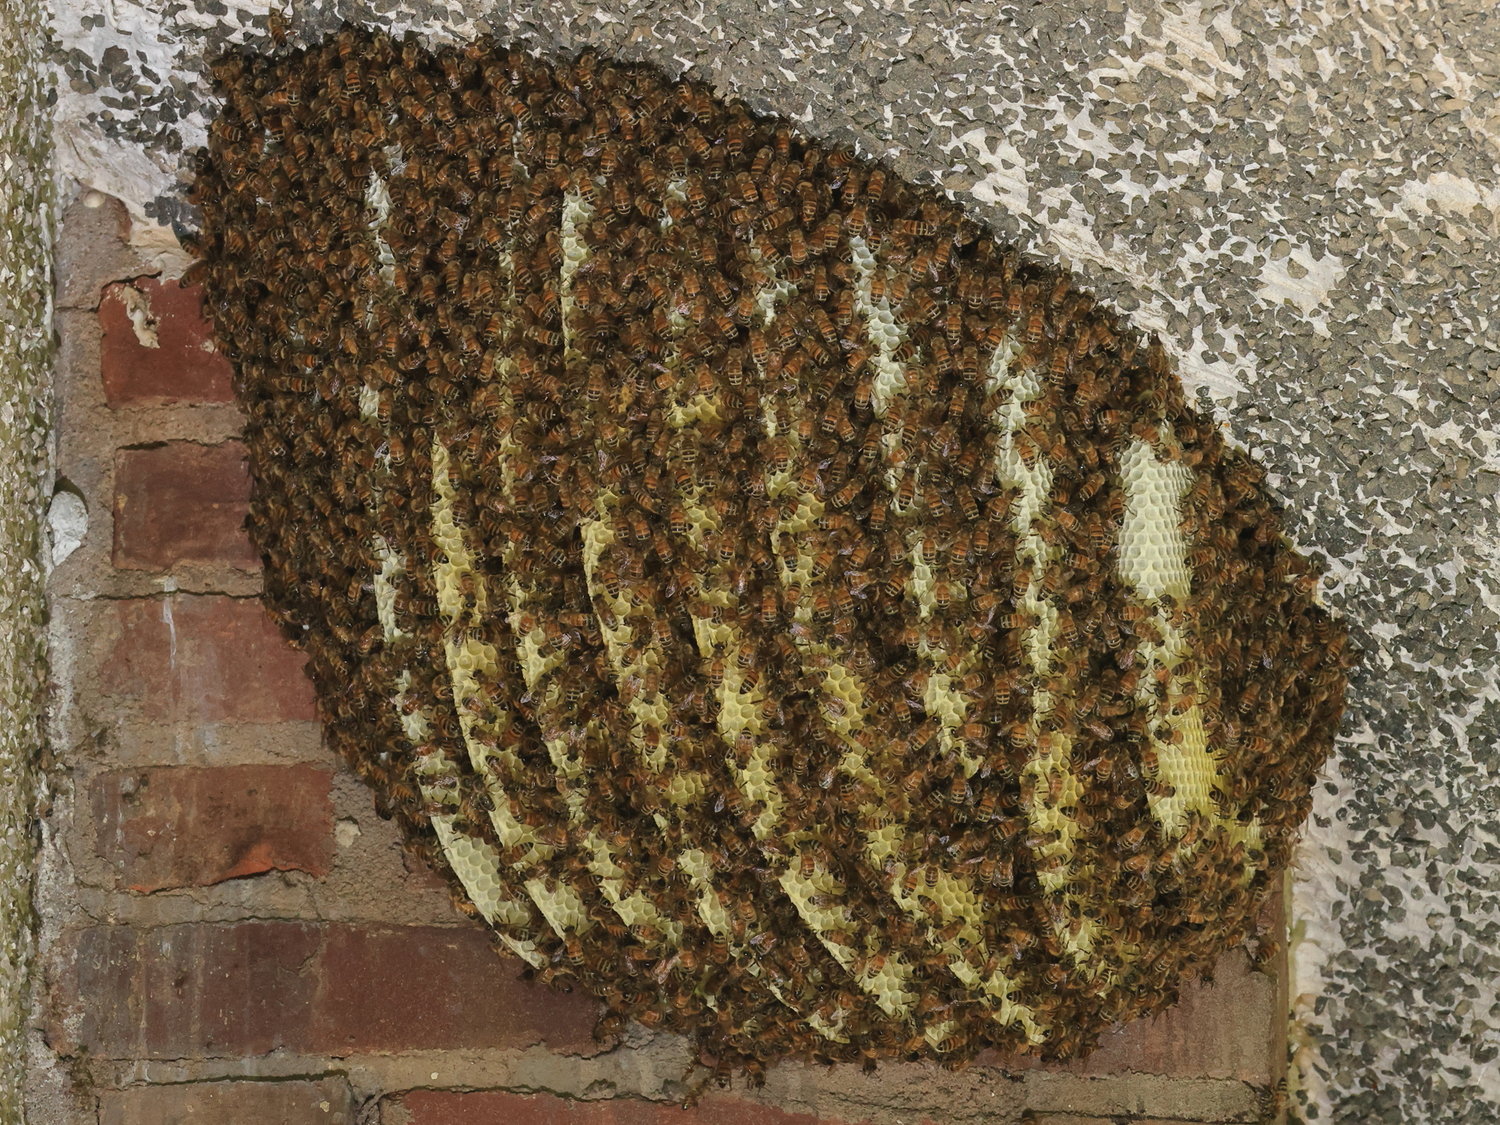 These bees decided that they didn’t need any protection from the elements, and drew out their nest comb, so it is exposed directly under the eaves of the house.